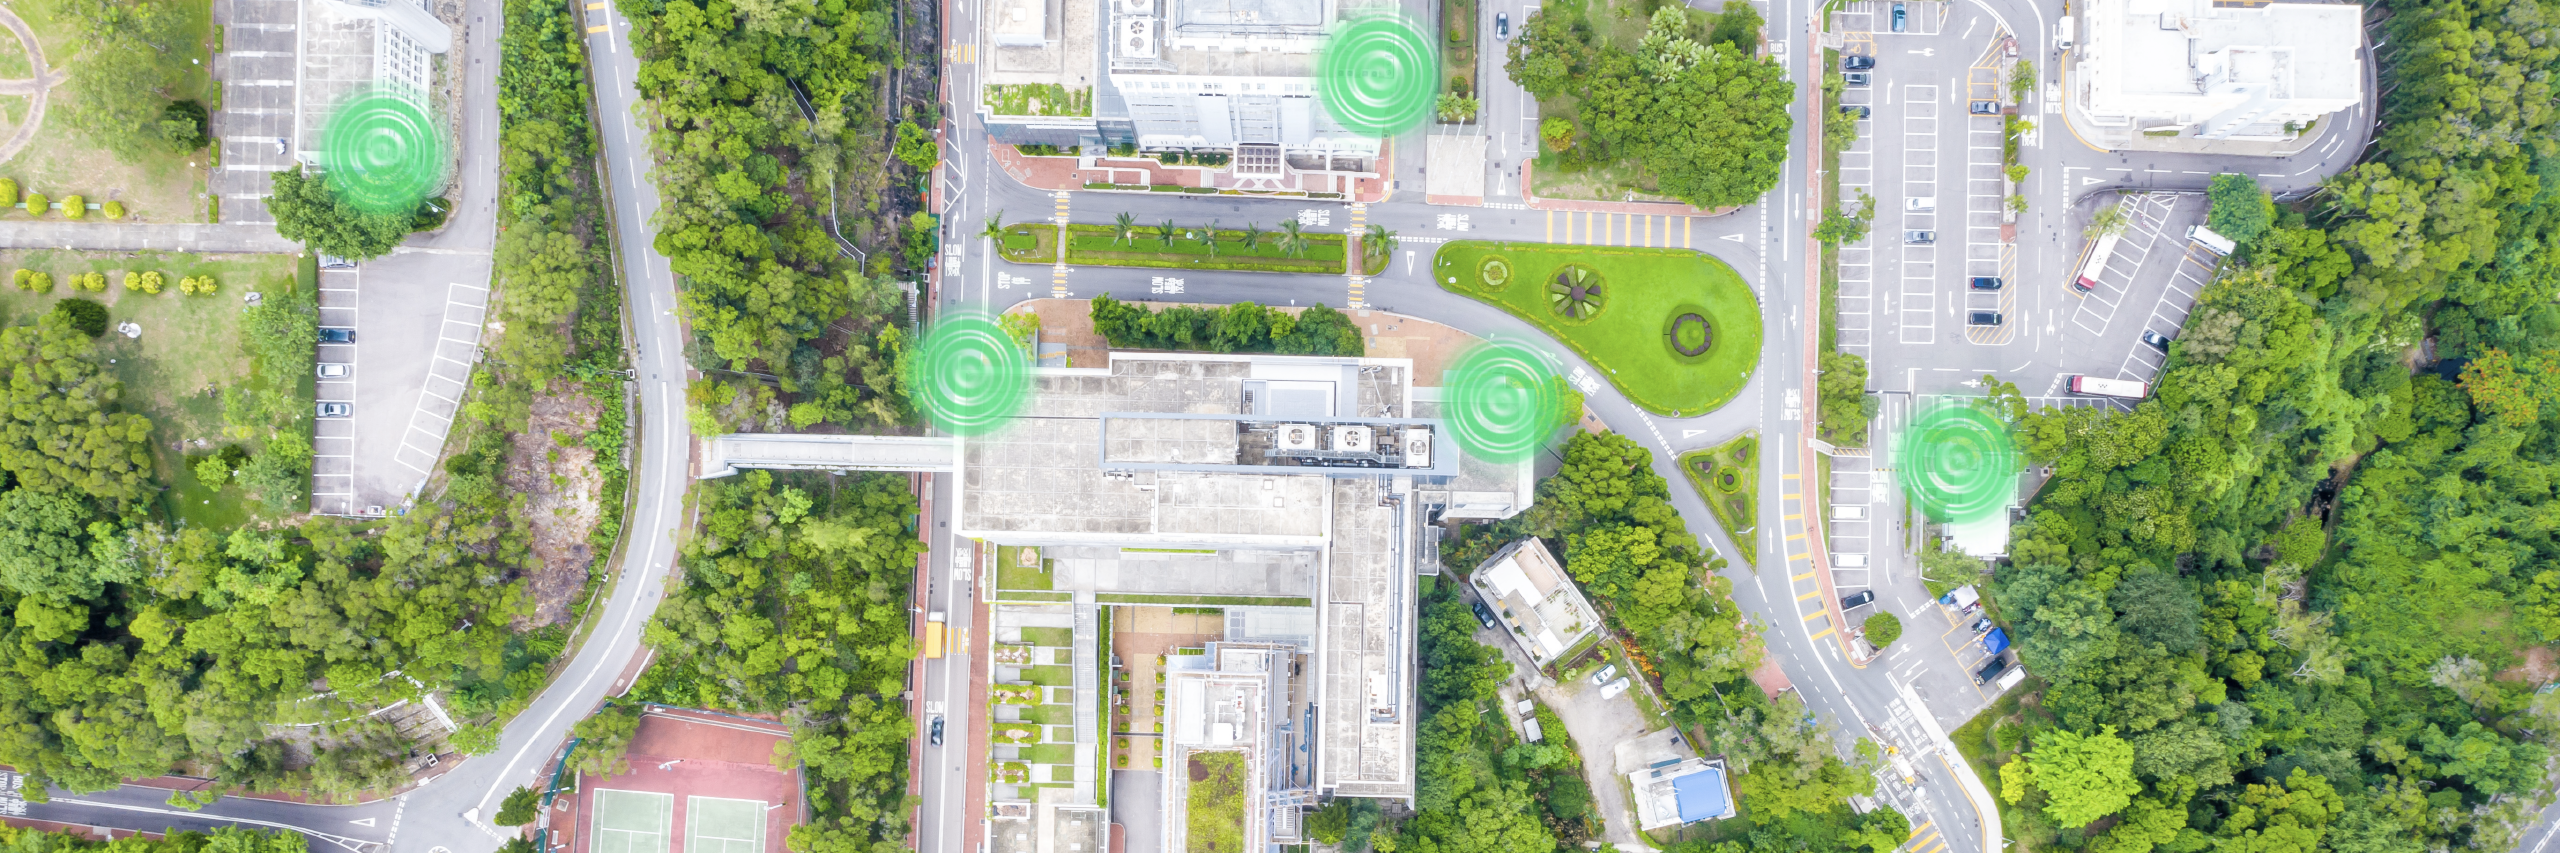 Residential area with homes monitored by sensors